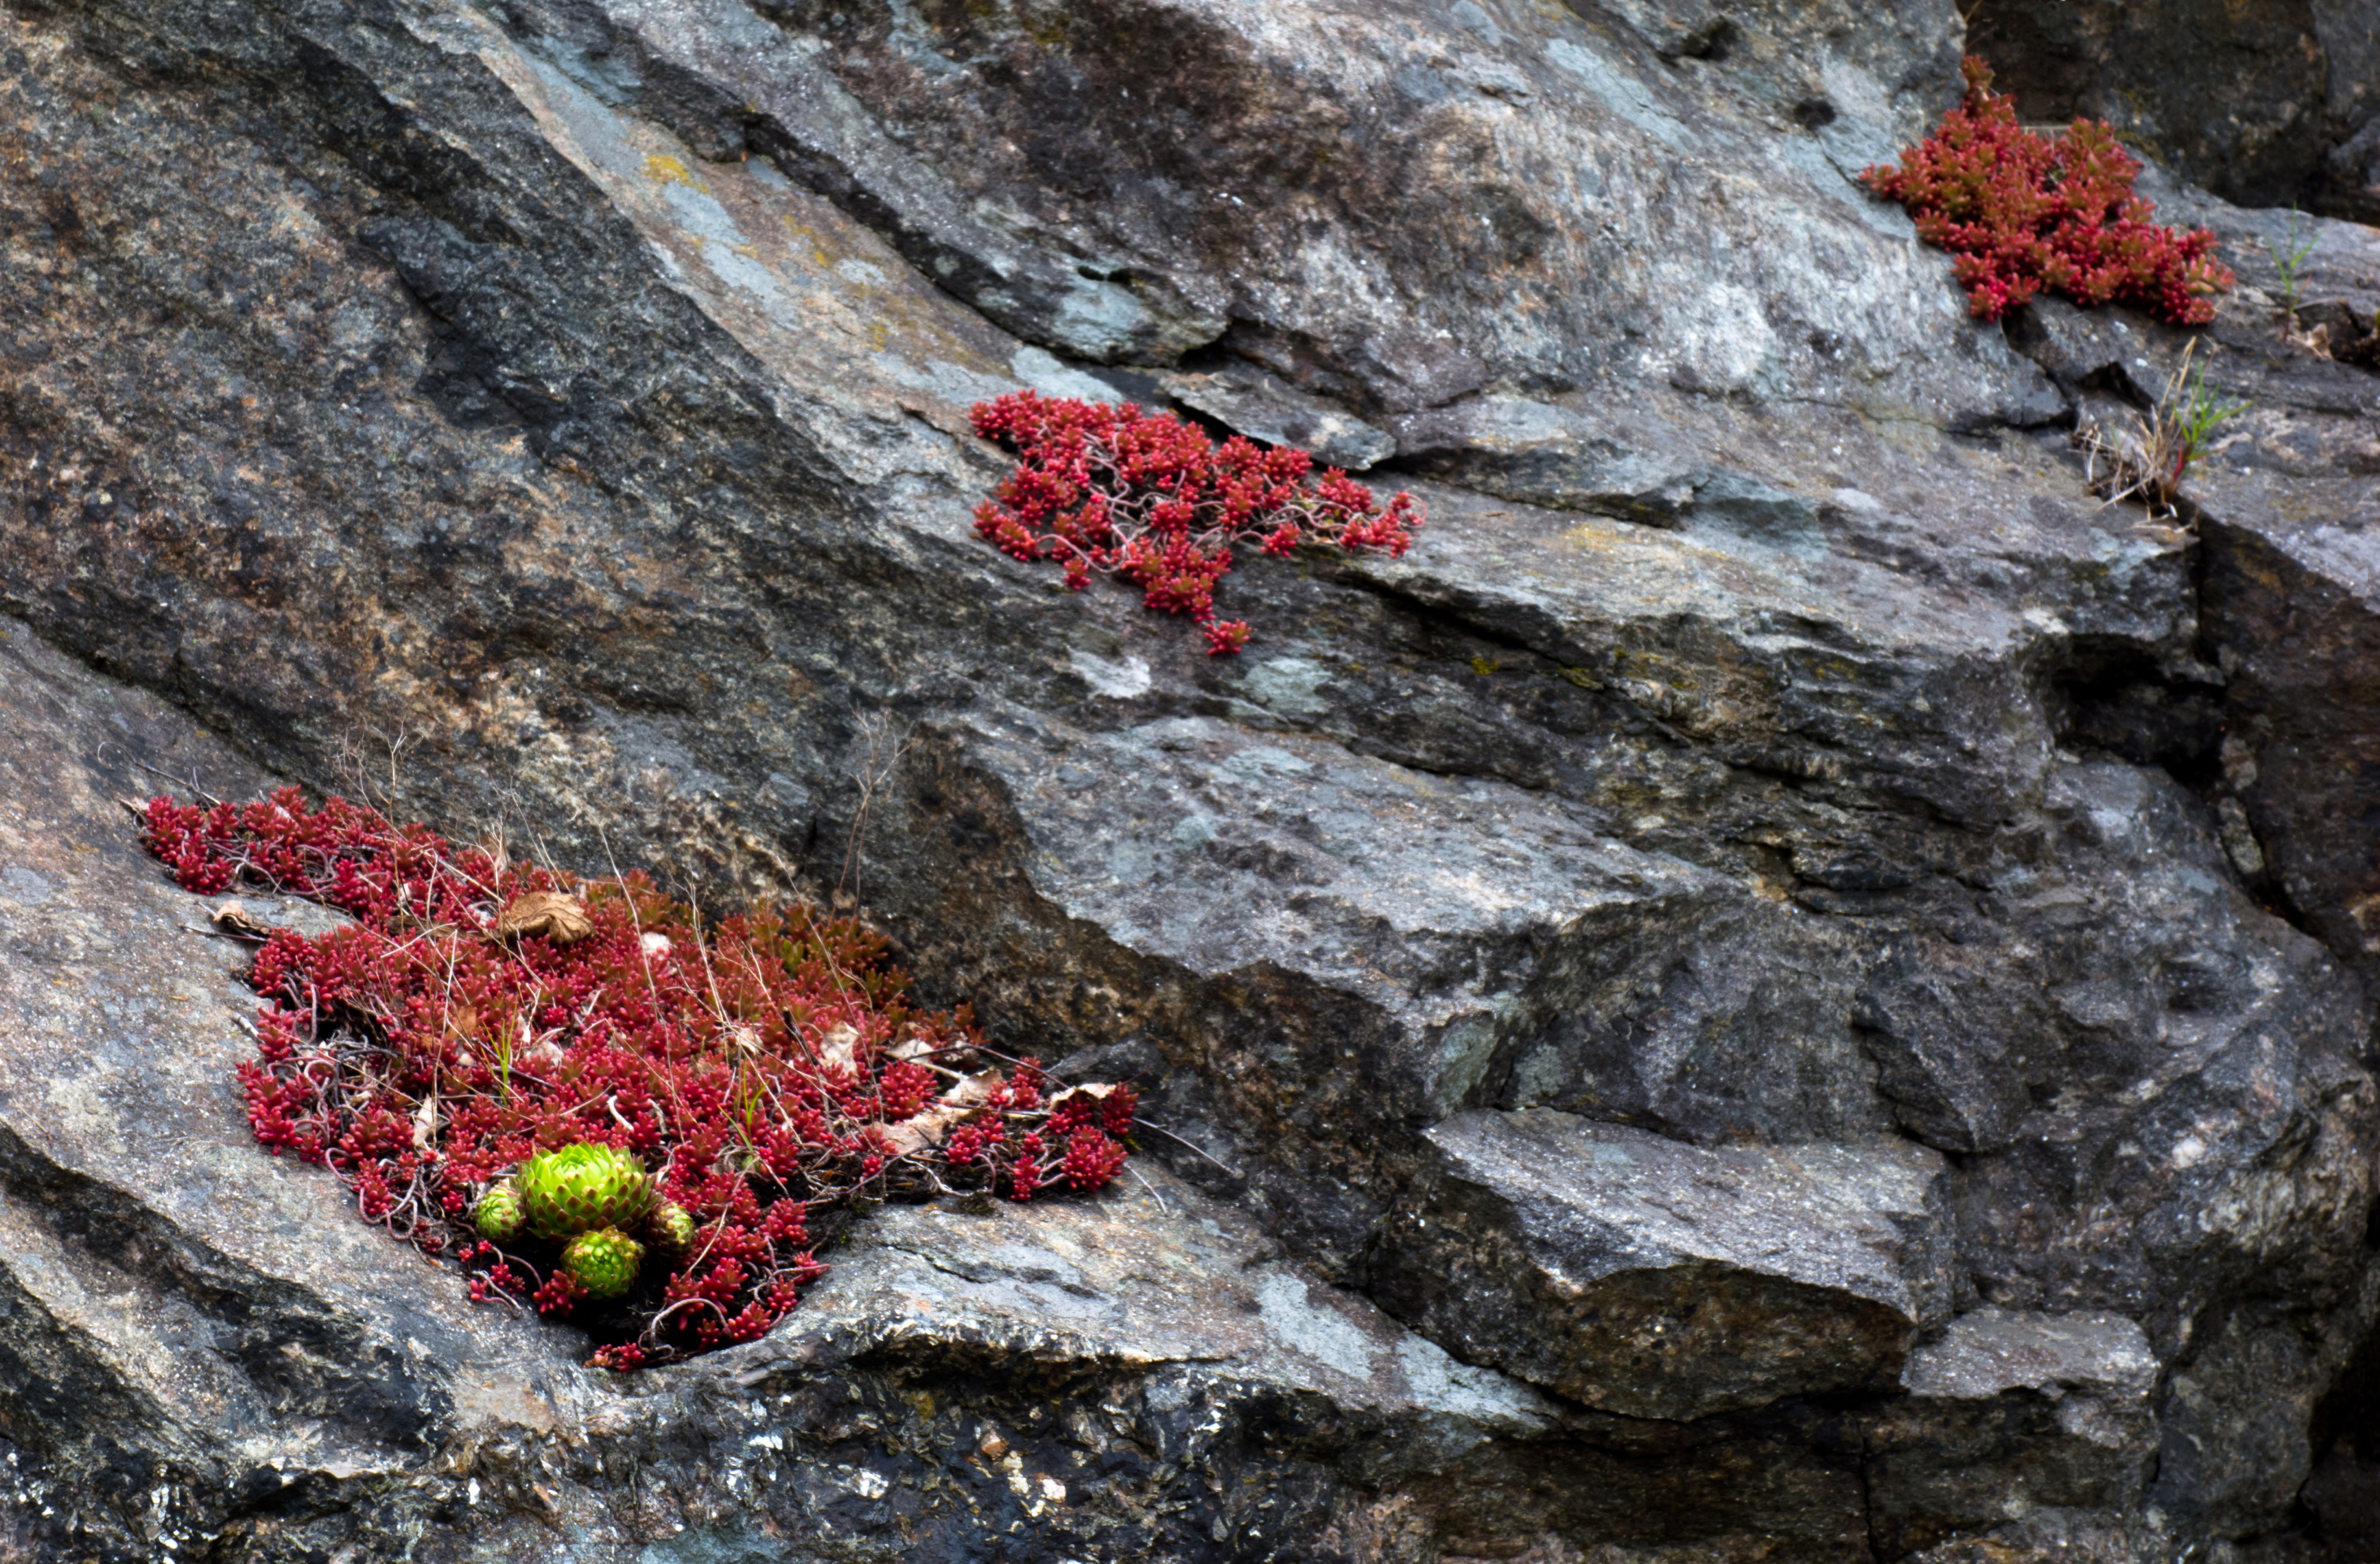 Granite cliff with common houseleek and pink jelly bean plant